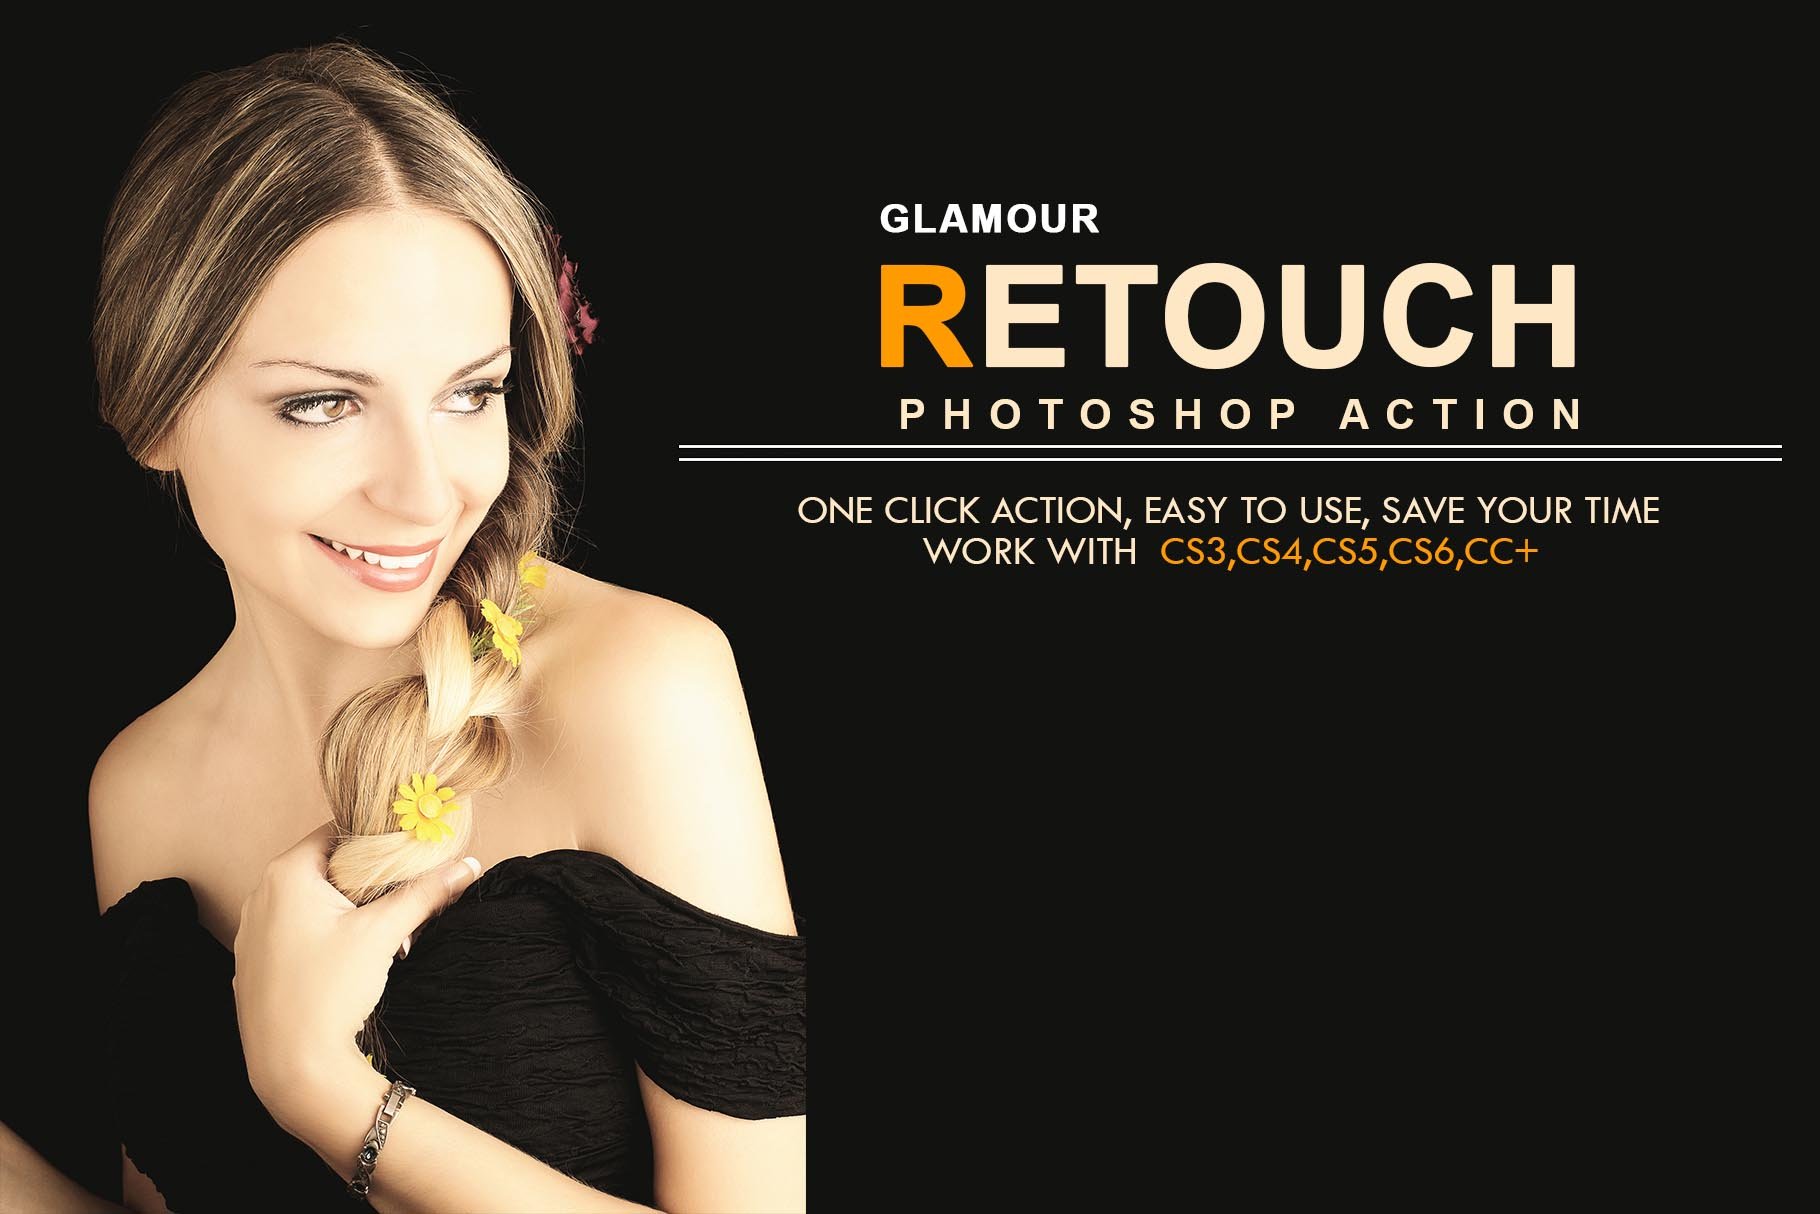 Glamour Retouch Photoshop Actioncover image.